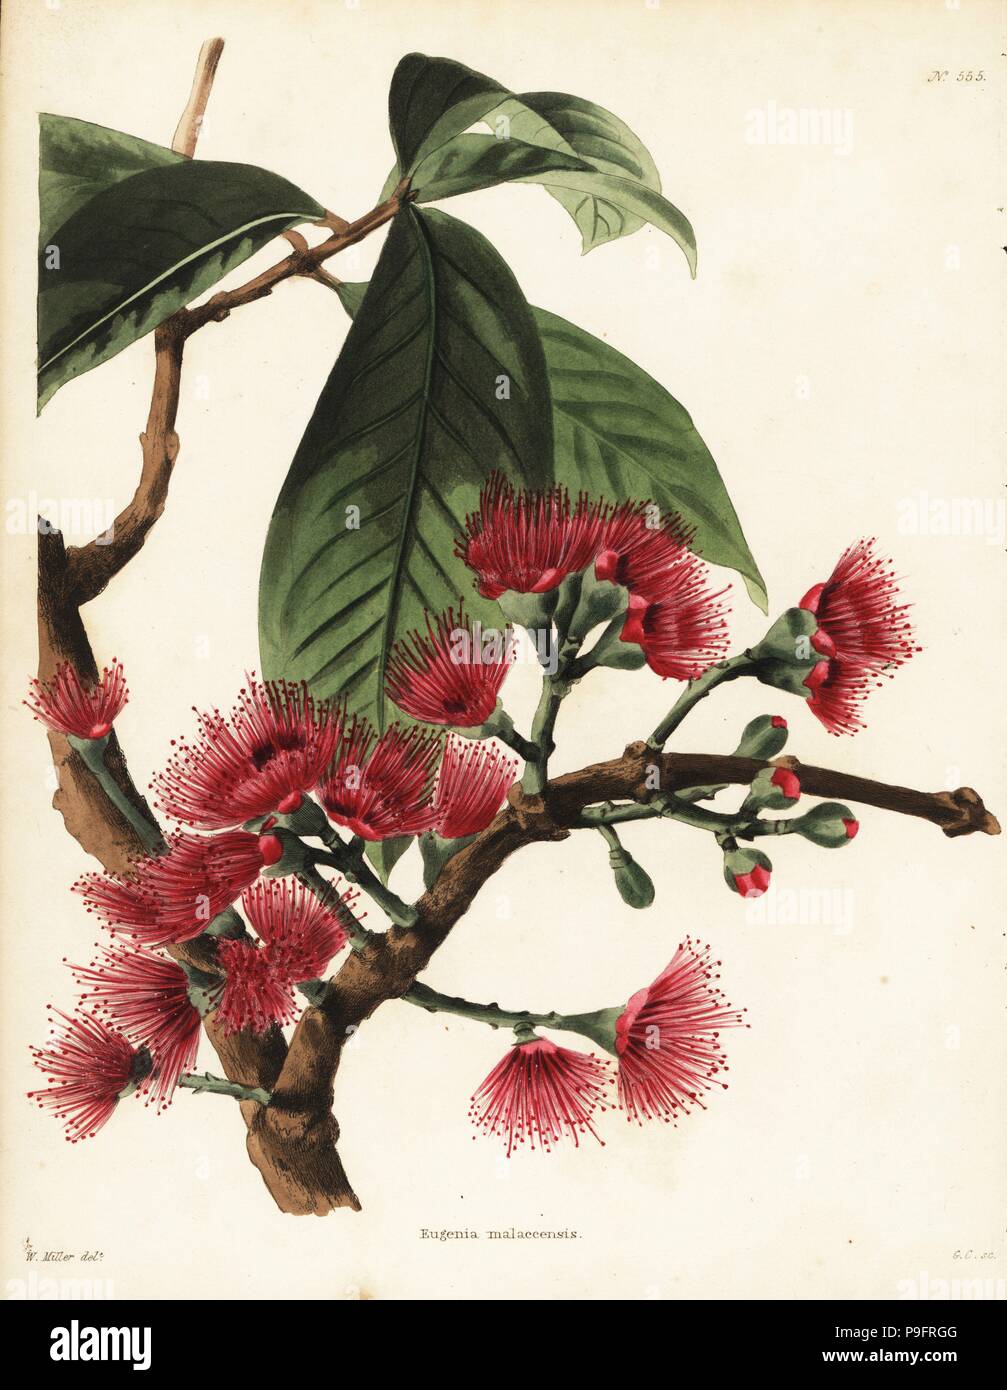 Malay rose apple, Syzygium malaccense (Eugenia malaccensis). Handcoloured copperplate engraving by George Cooke after an illustration by William Miller from Conrad Loddiges' Botanical Cabinet, Hackney, London, 1821. Stock Photo